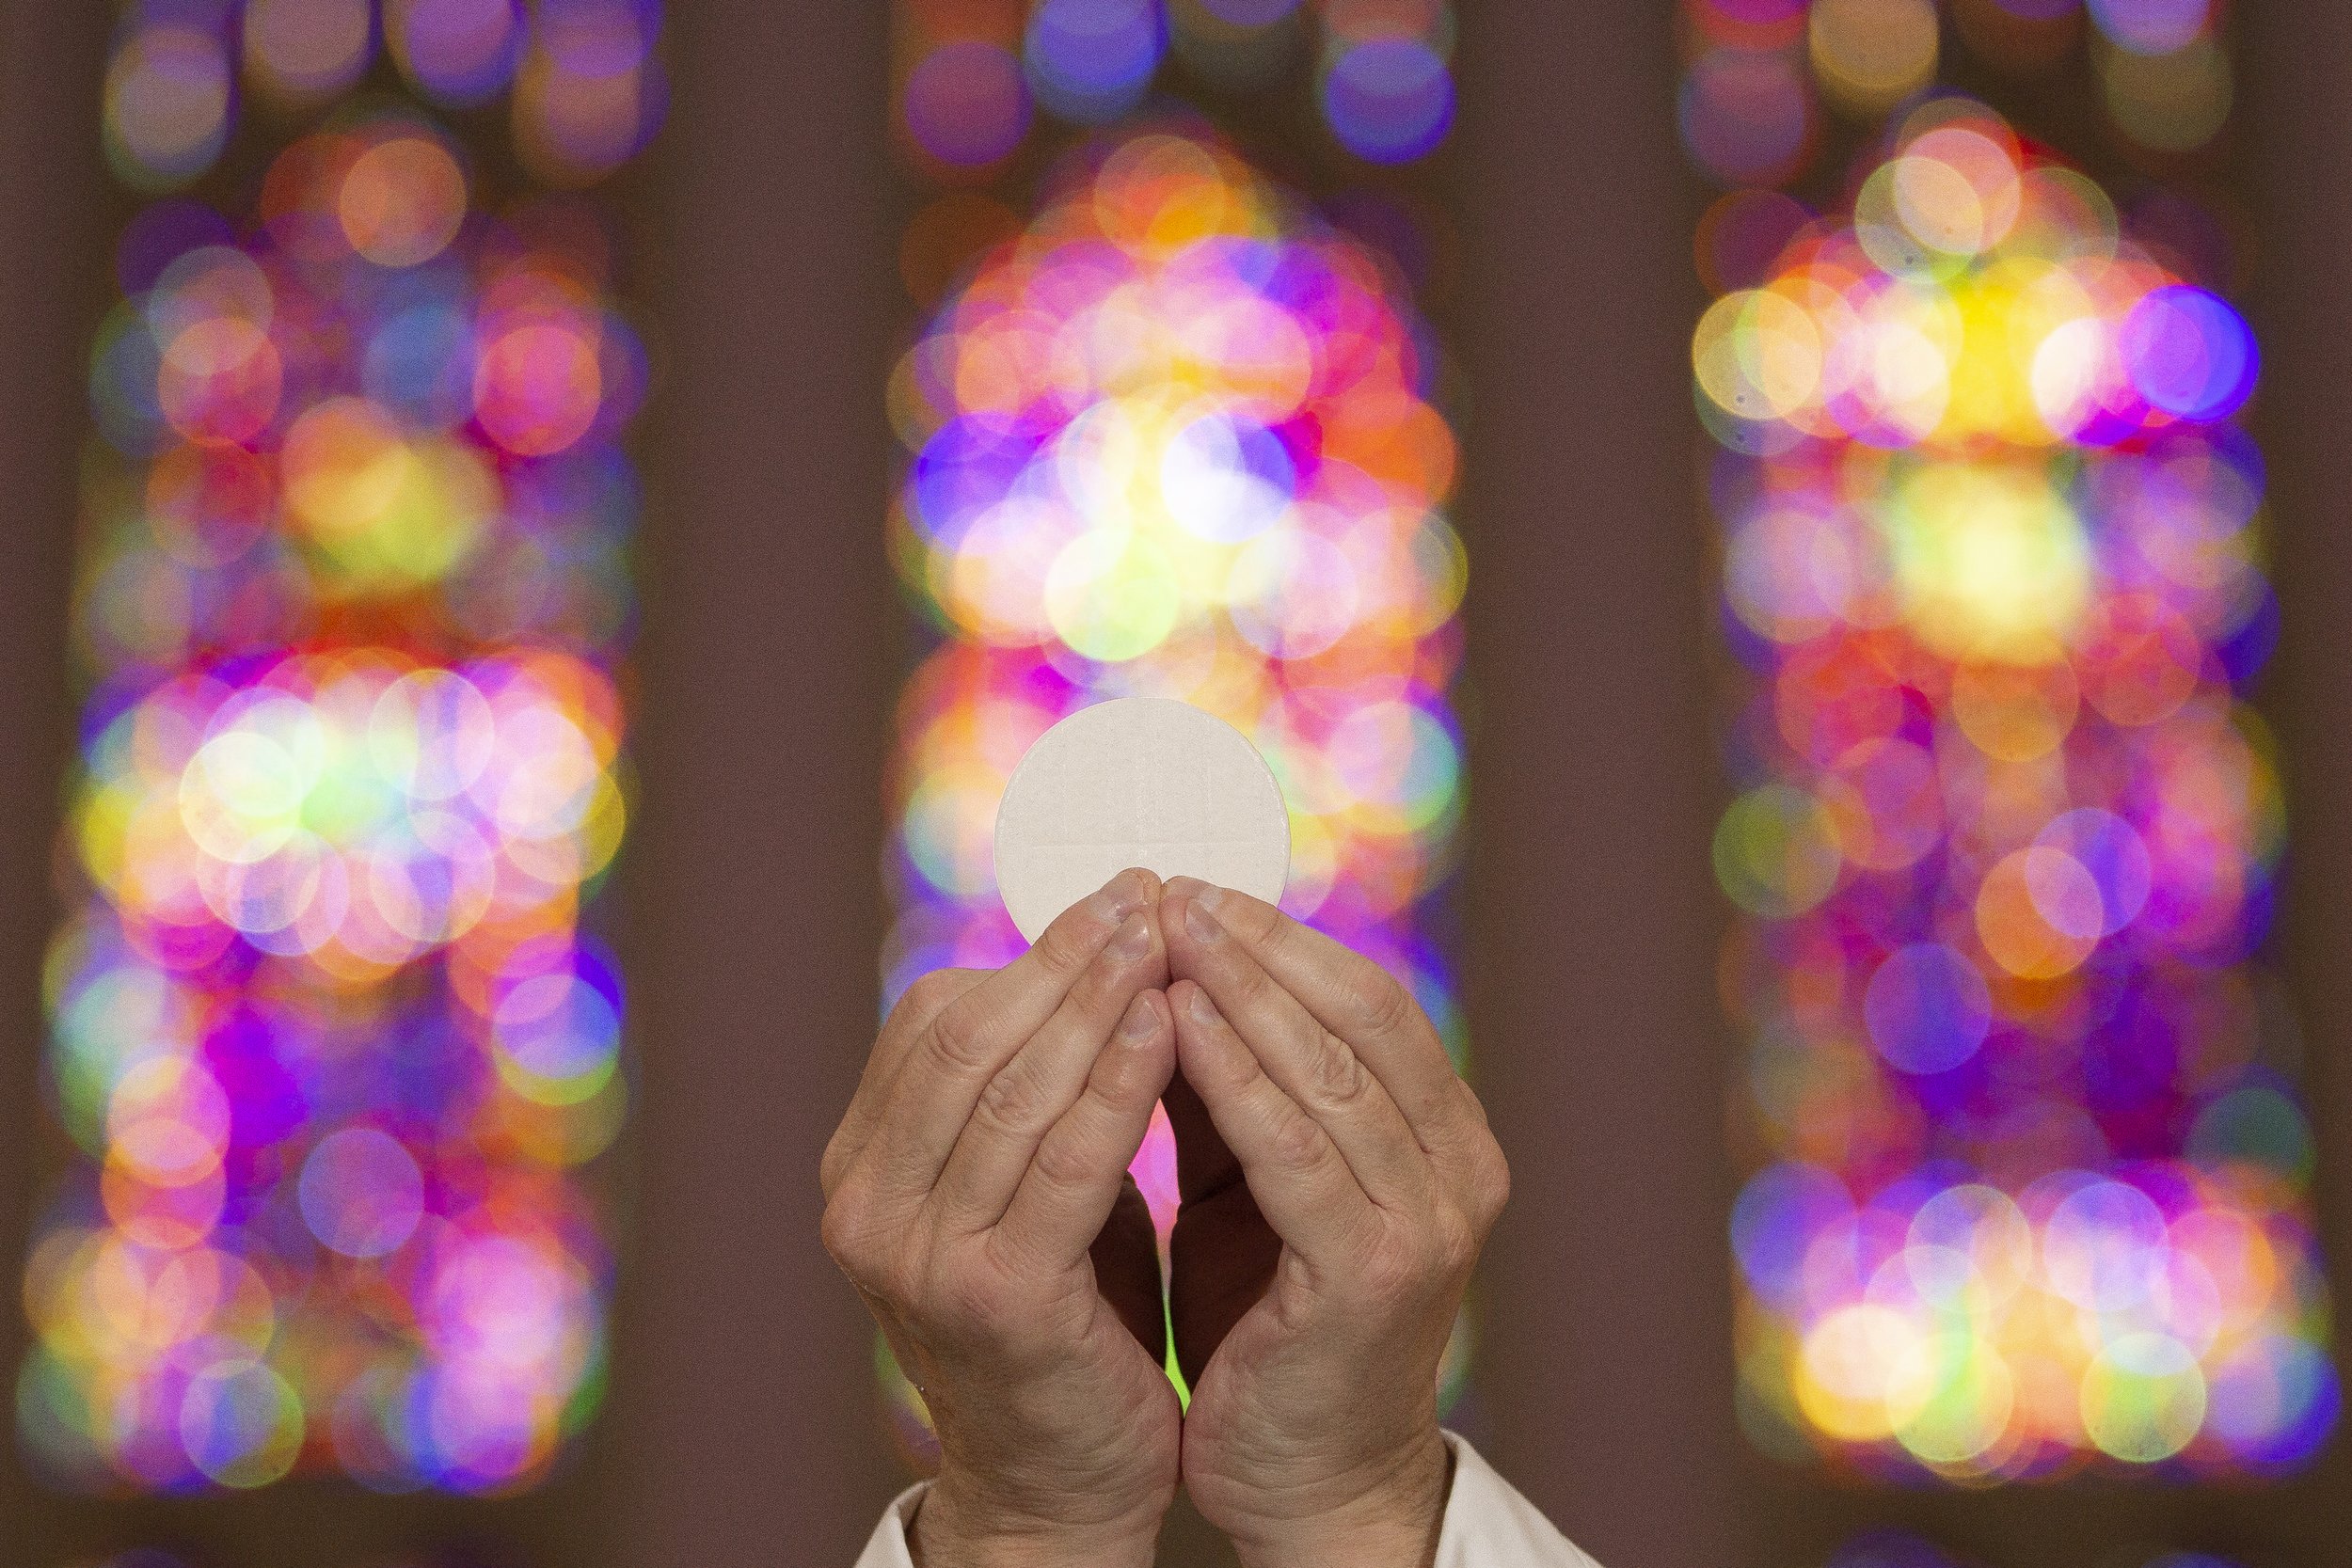  In this photo illustration, the Eucharist was depicted using an unconsecrated host held by Father Nicholas Smith on April 21 at St. Vincent de Paul Chapel in the Cardinal Rigali Center in Shrewsbury, Missouri.  